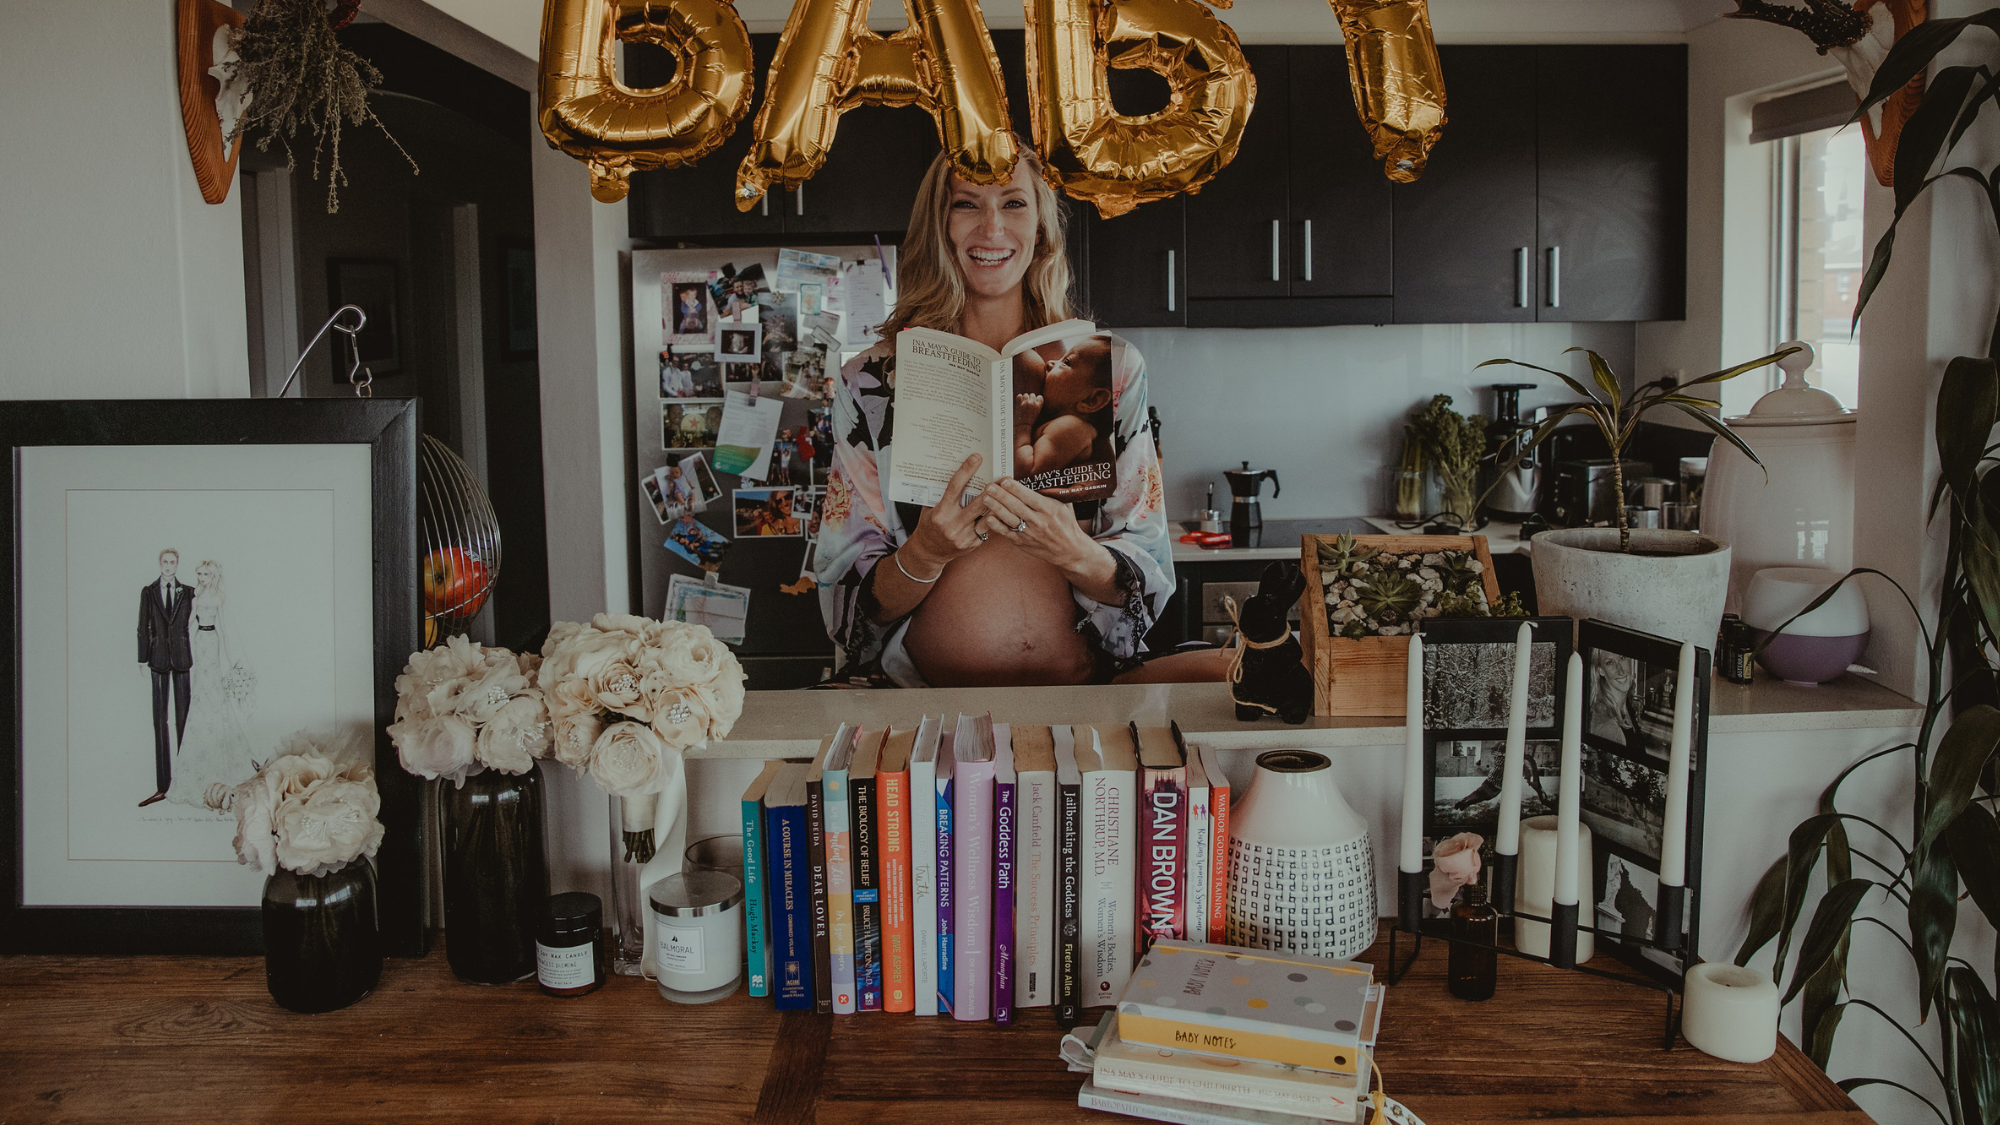 Top 5 tips for a Positive, Empowered Birth